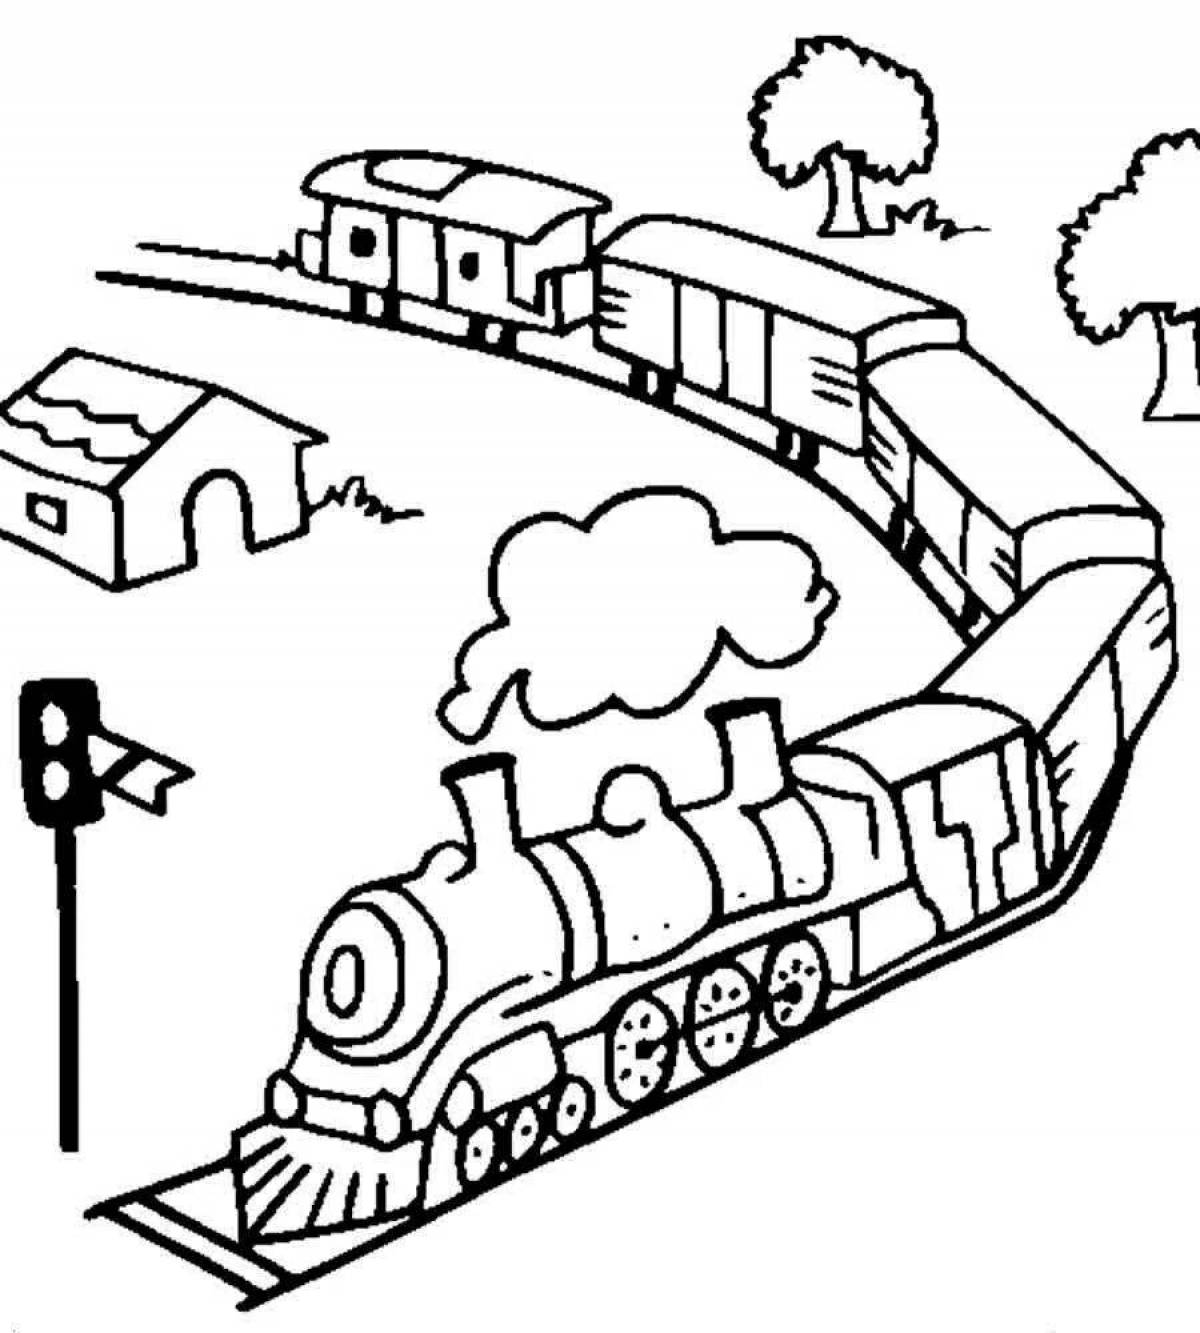 Exquisite train coloring book for kids